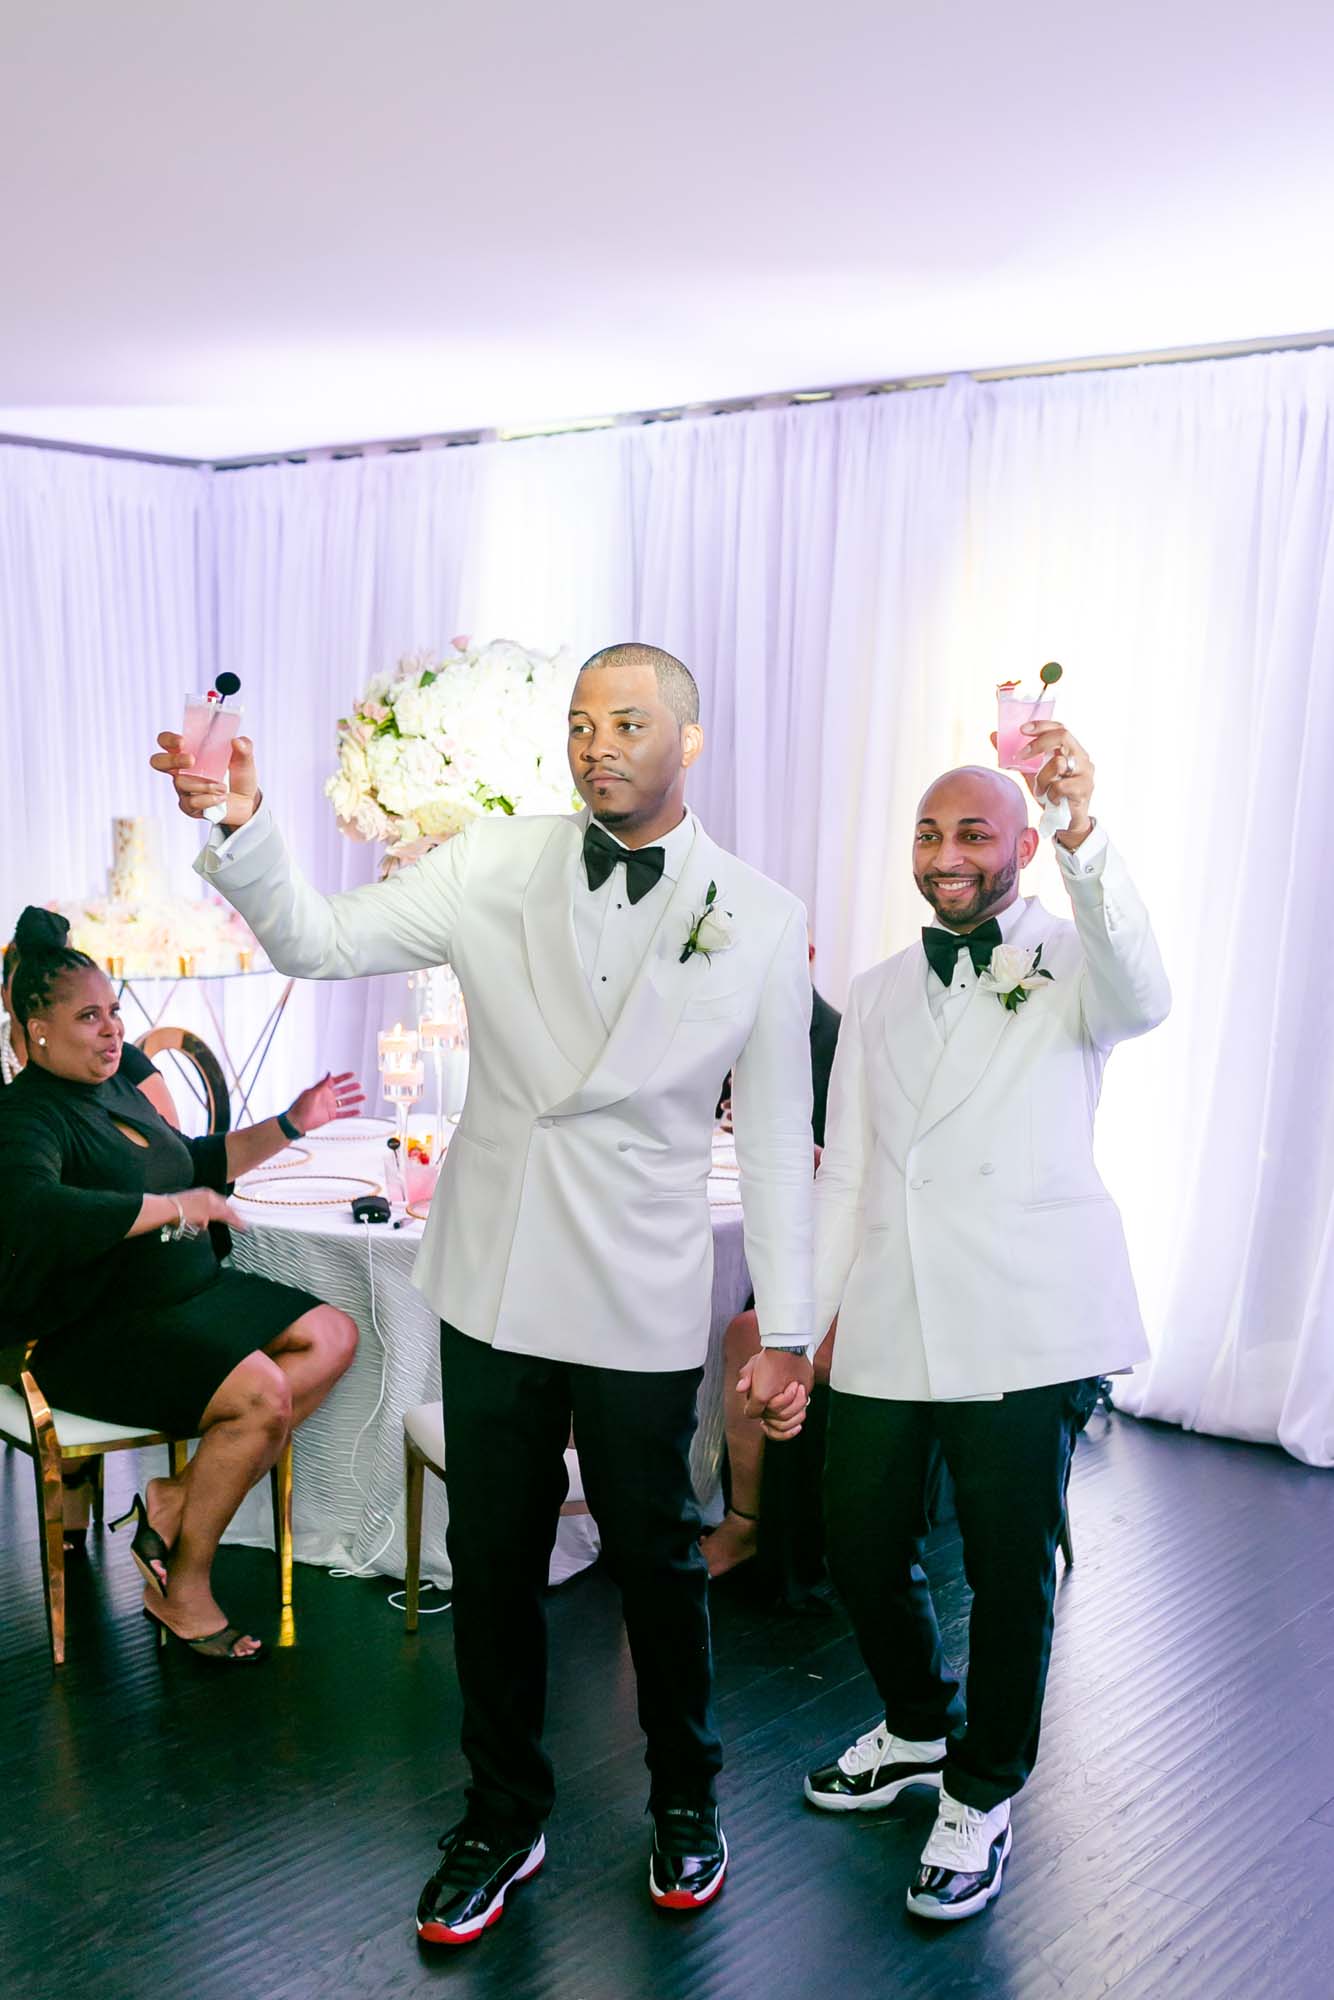 This couple transformed their home into a fabulous wedding venue | Sarandipity Photography | Featured on Equally Wed, the leading LGBTQ+ wedding magazine - grooms, white tuxedo